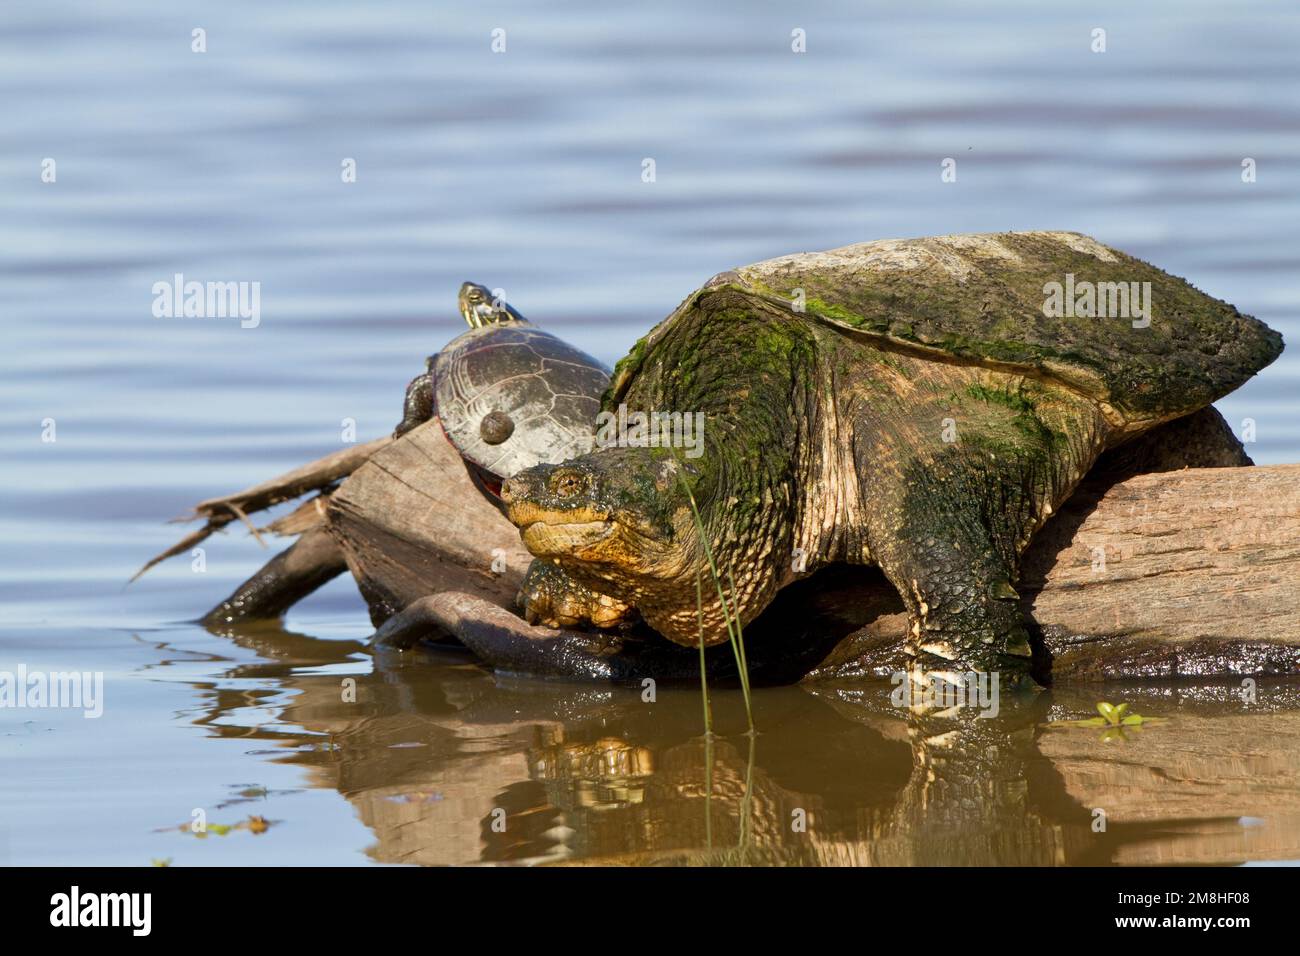 02509-00307 Snapping Turtle (Chelydra serpentina) on log in wetland, Marion Co., IL Stock Photo